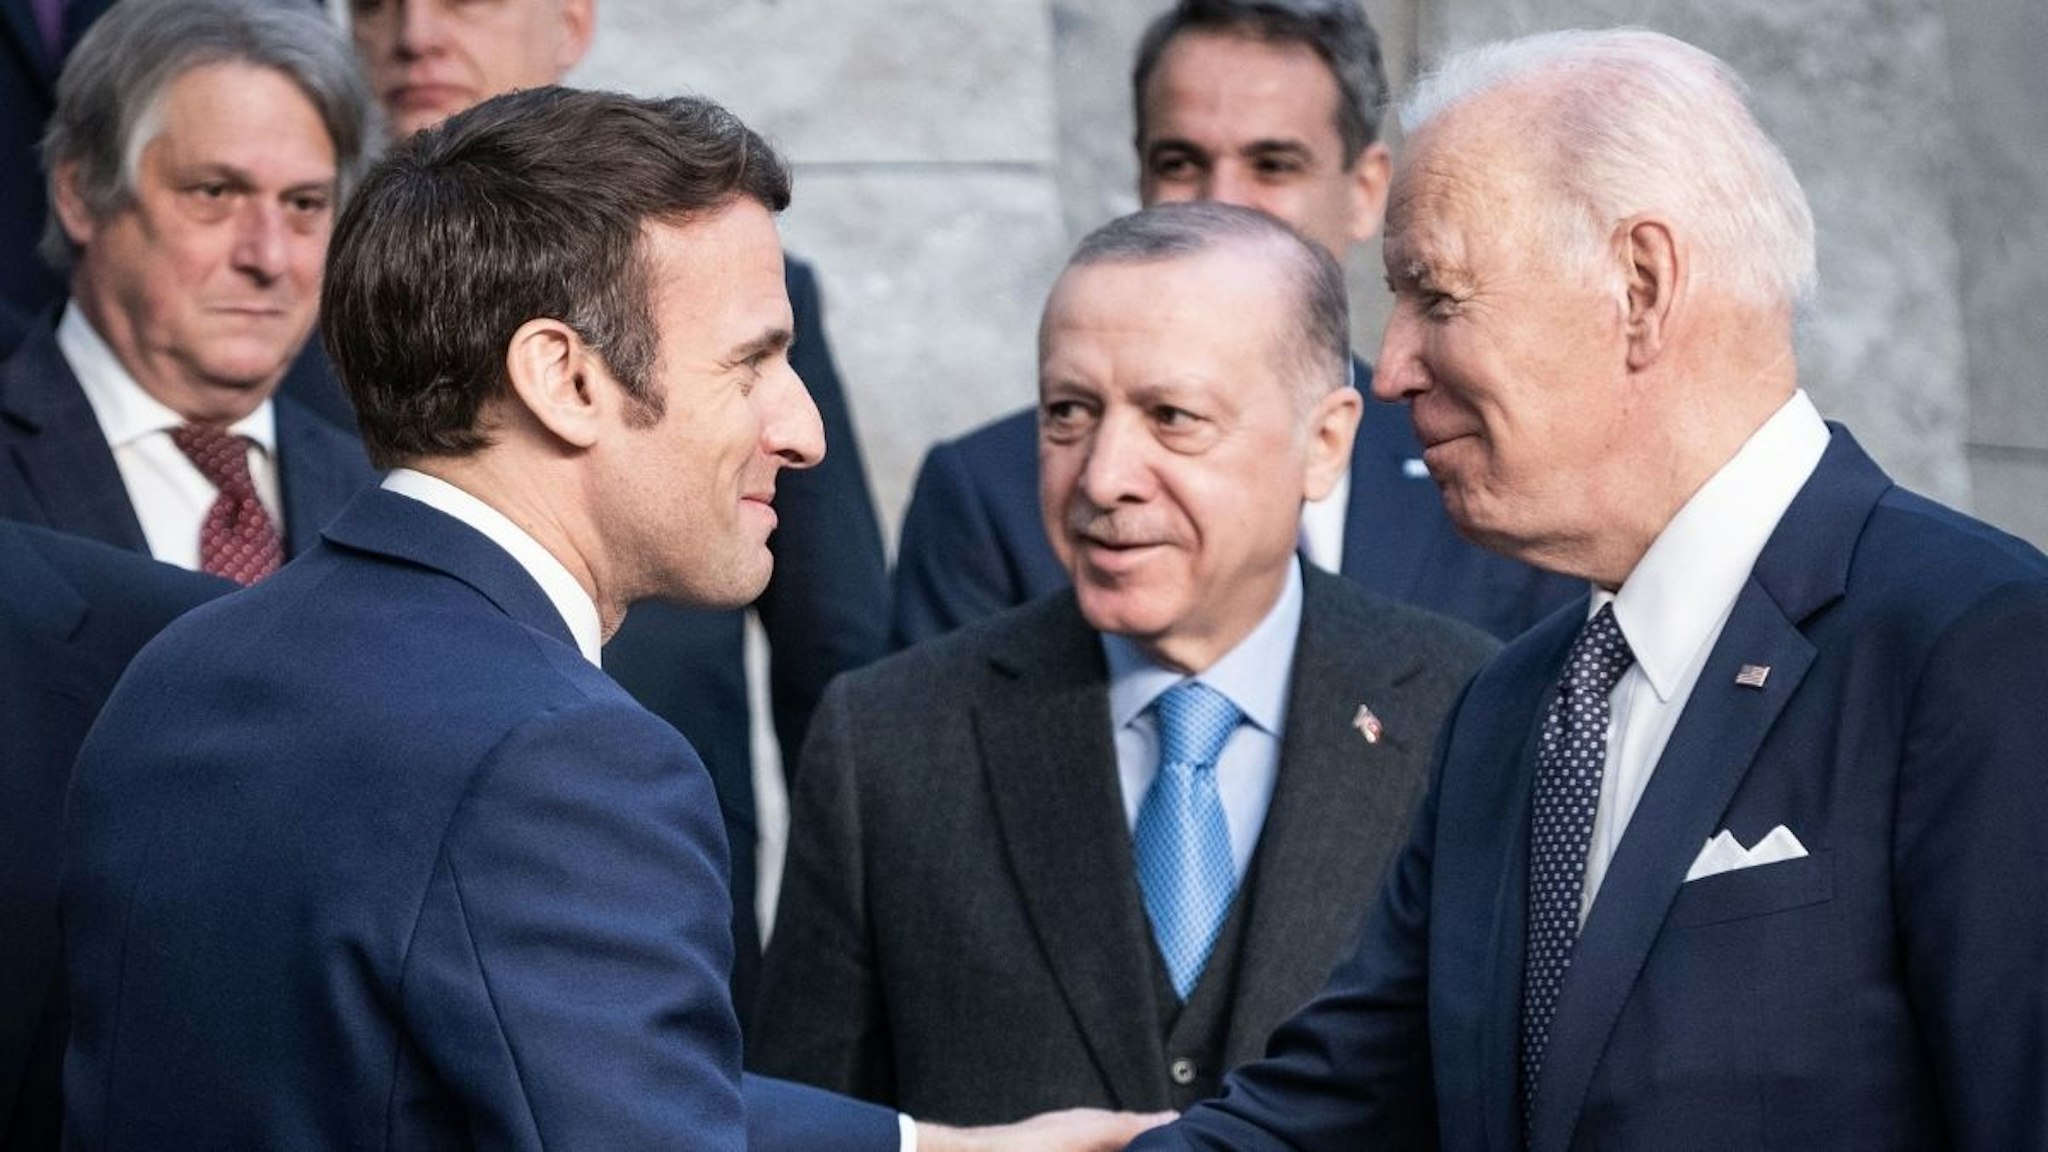 24 March 2022, Belgium, Brüssel: Emmanuel Macron (l), President of France greets Joe Biden, President of the United States, as leaders pose for a family photo before a special NATO summit at NATO headquarters.